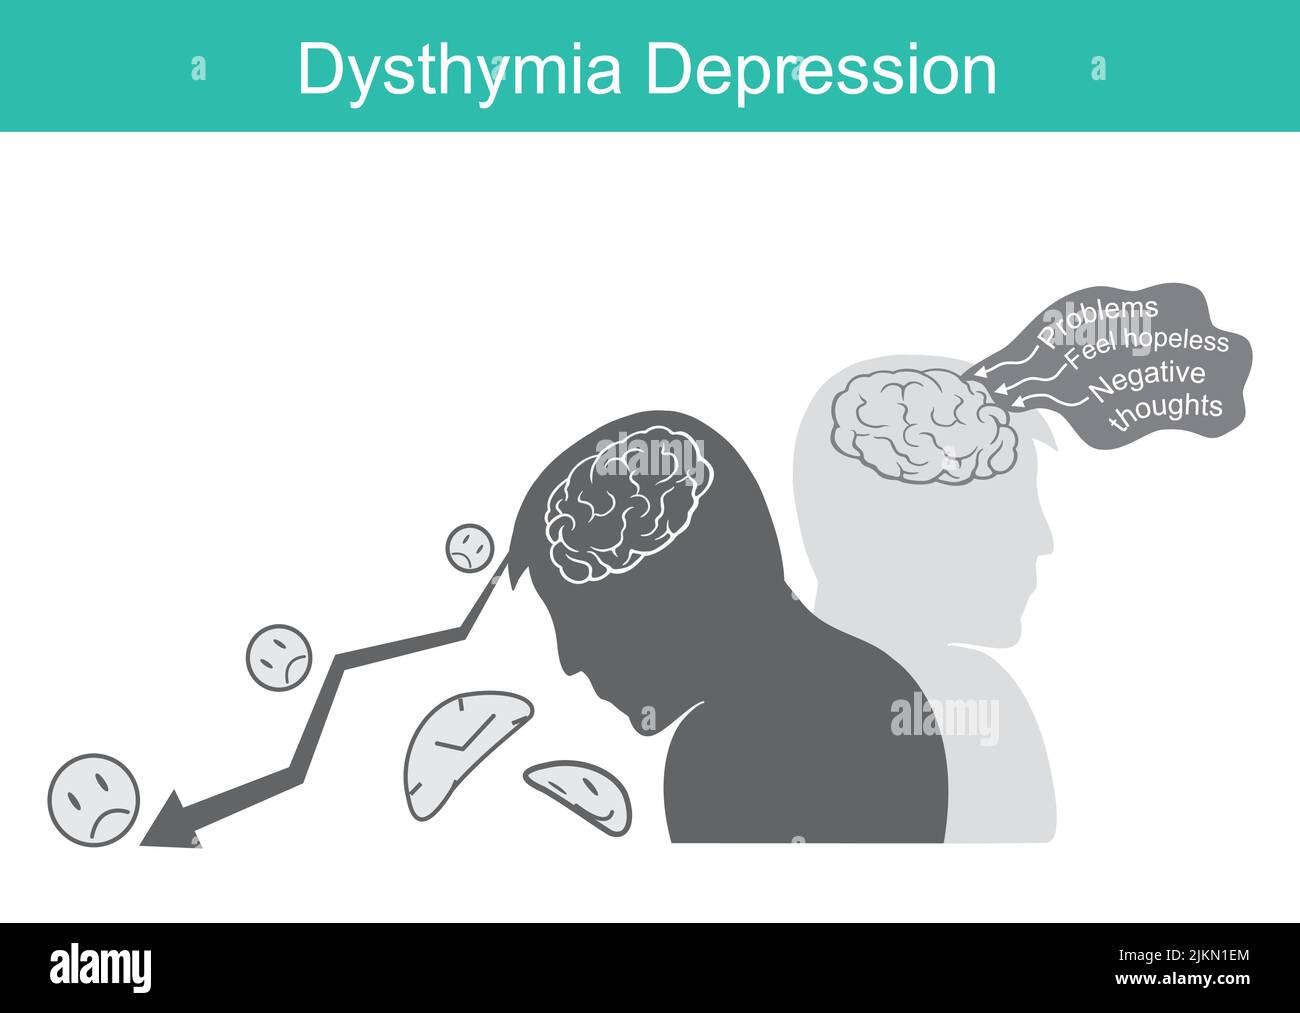 Dysthymia Depression. illustration for psychology in education brain and behaviour a patient depression. Stock Vector